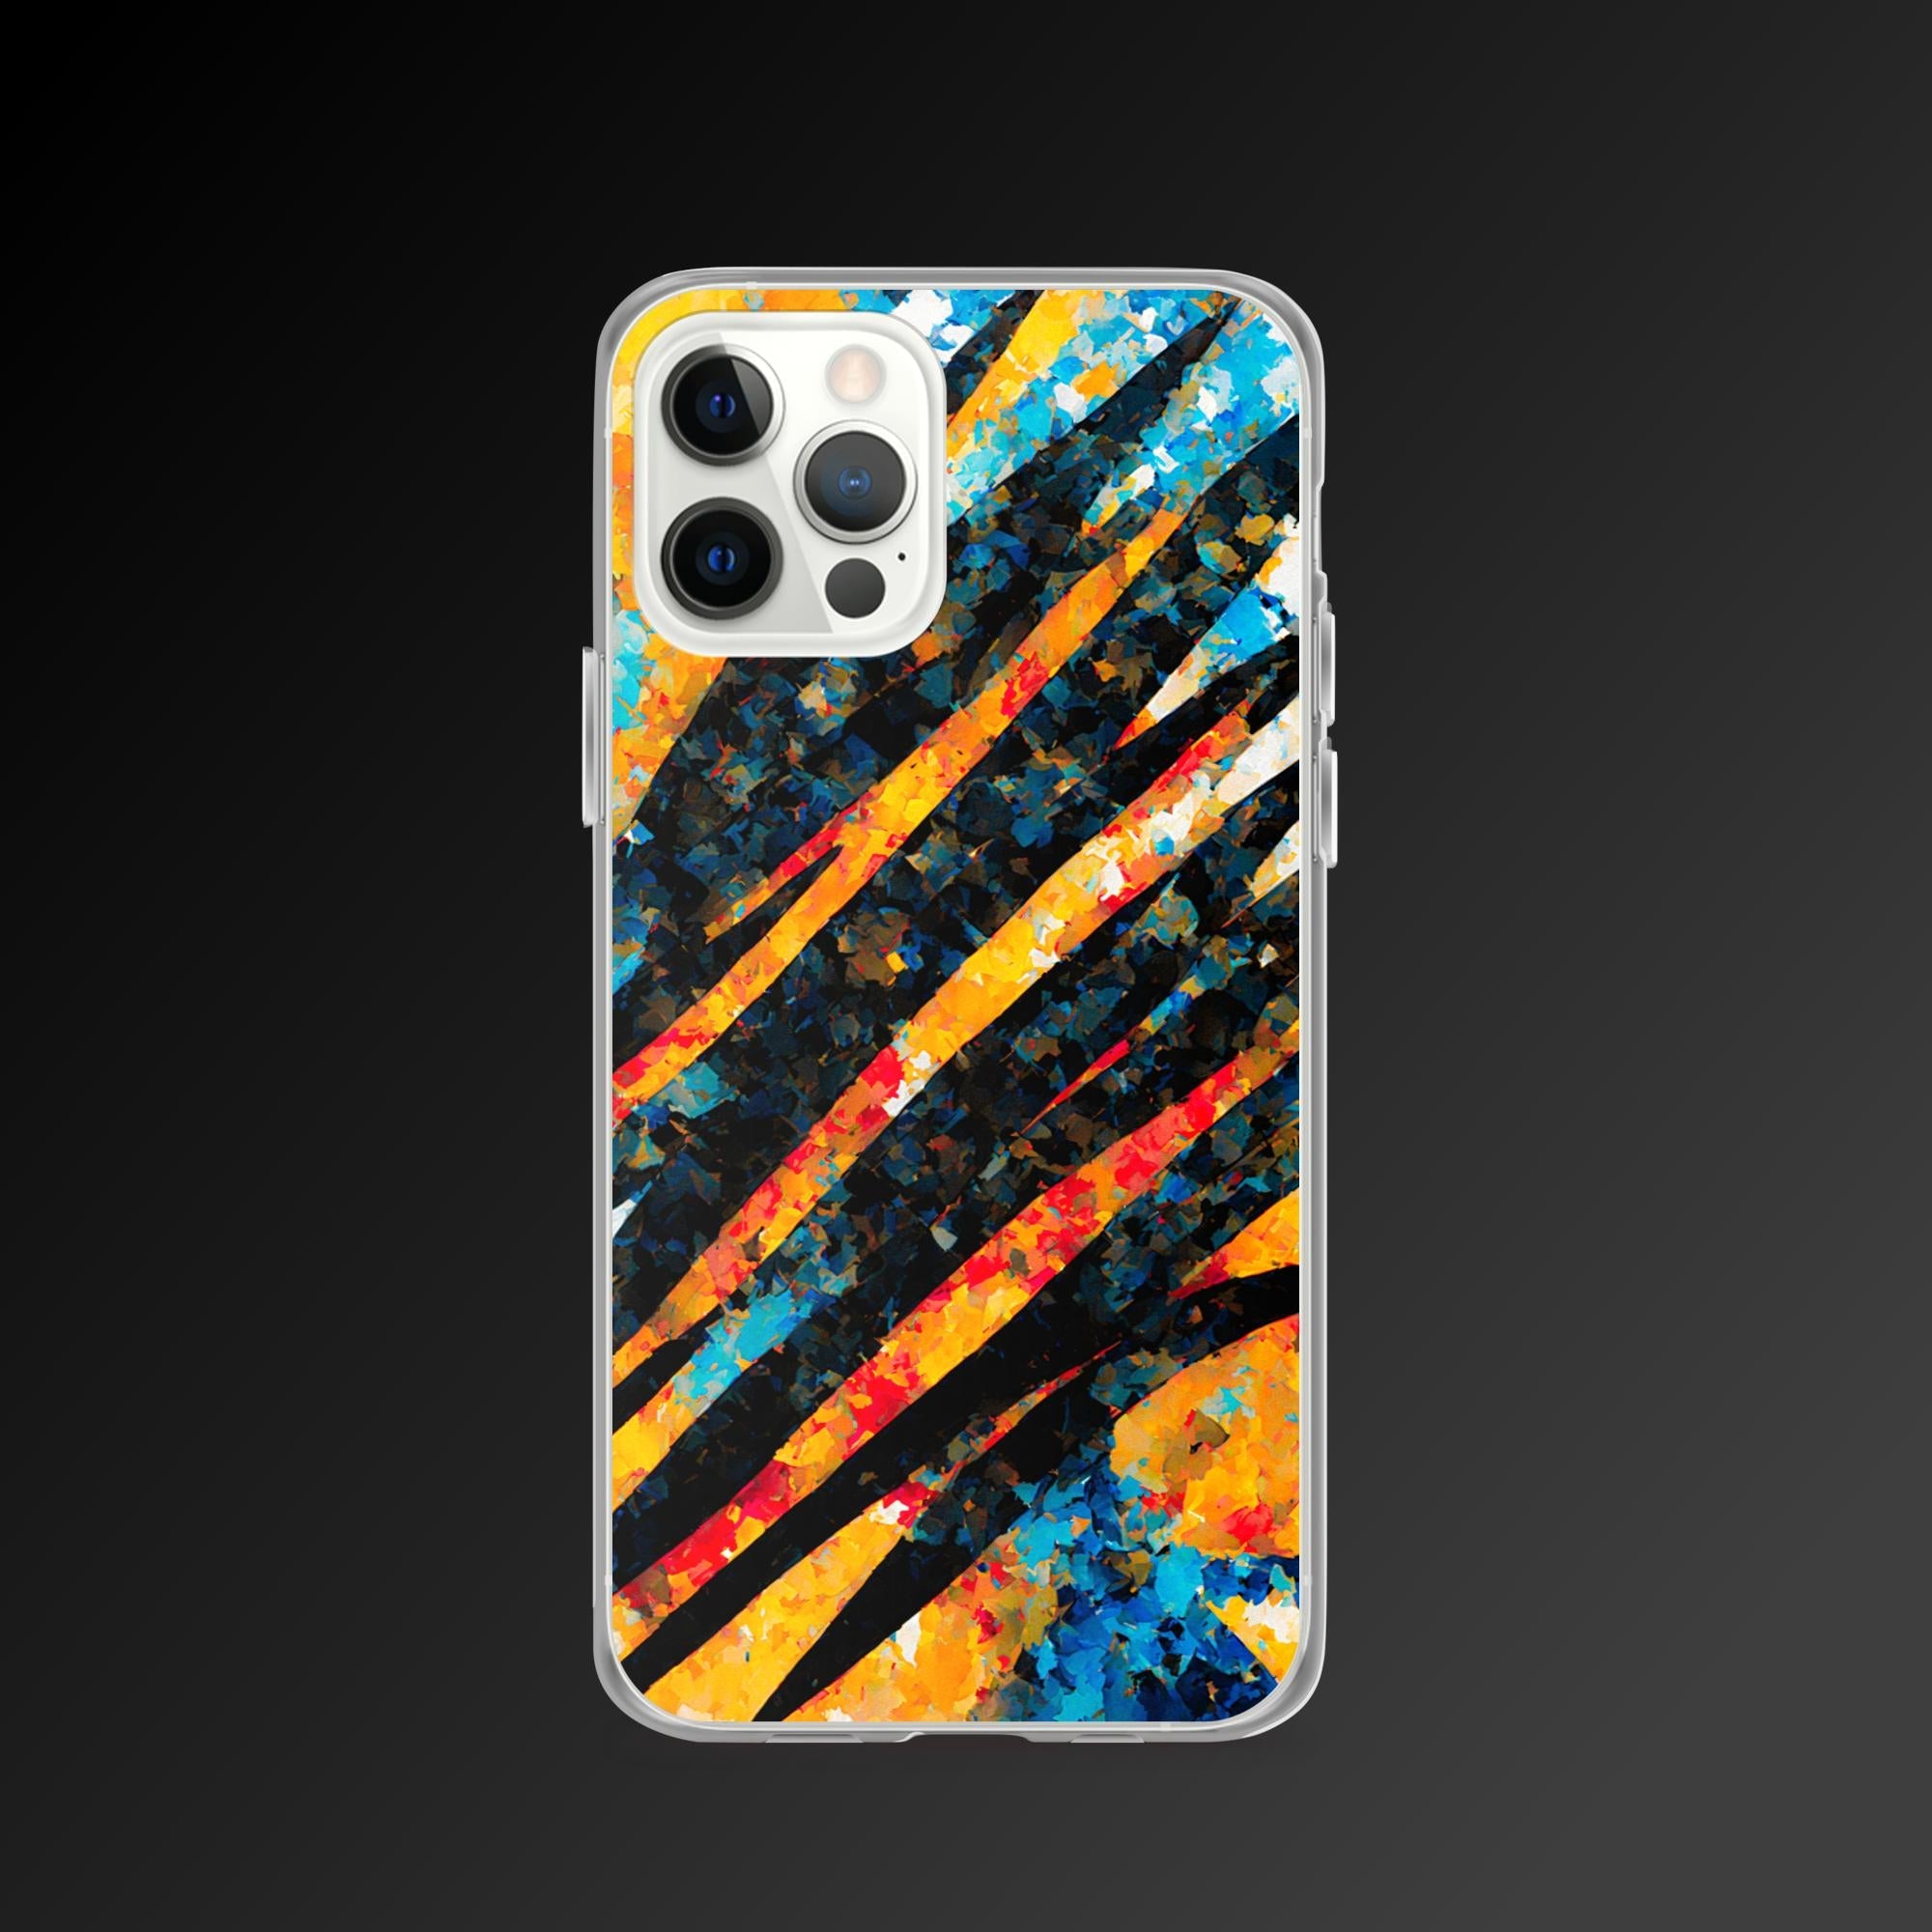 "Constant scar" clear iphone case - Clear iphone case - Ever colorful